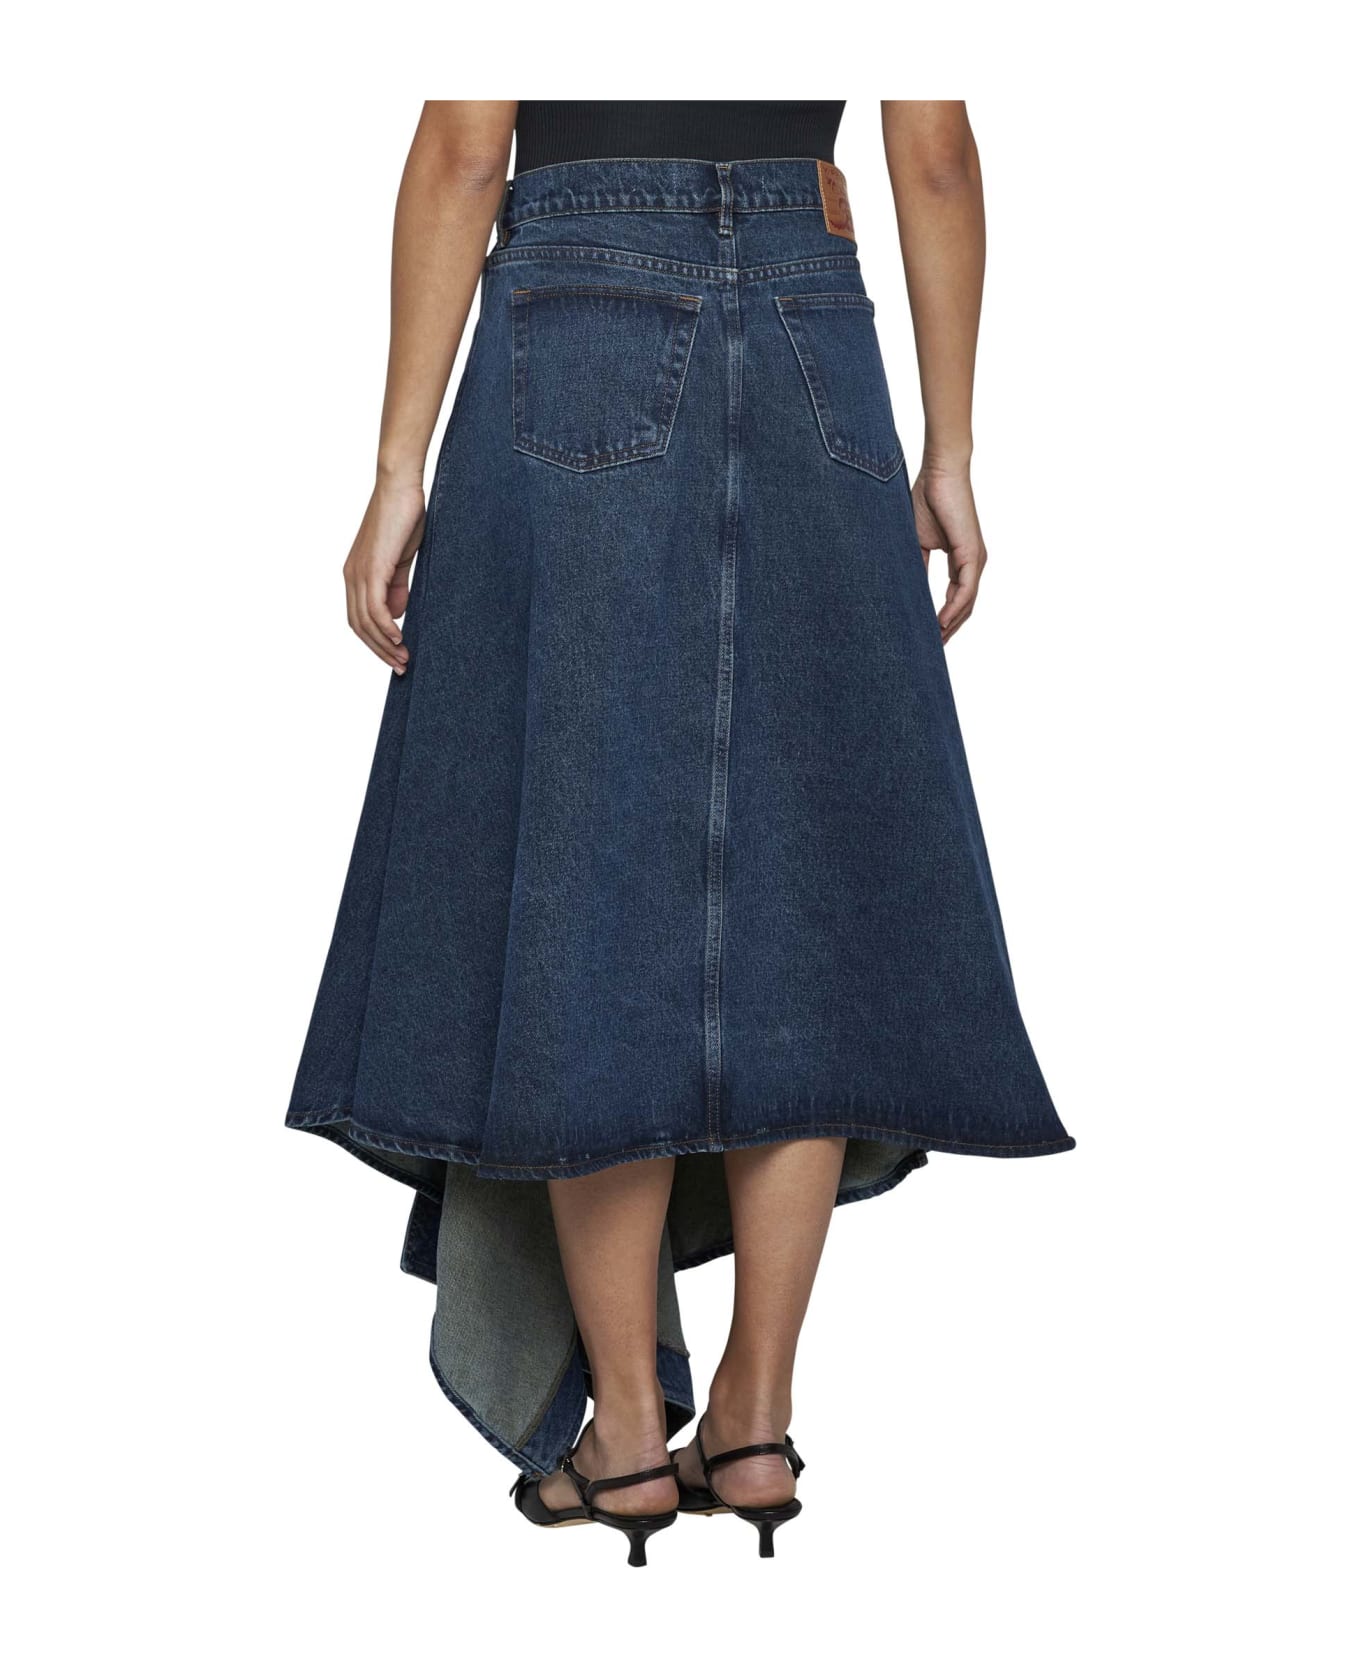 Y/Project Skirt - Evergreen vintage blue